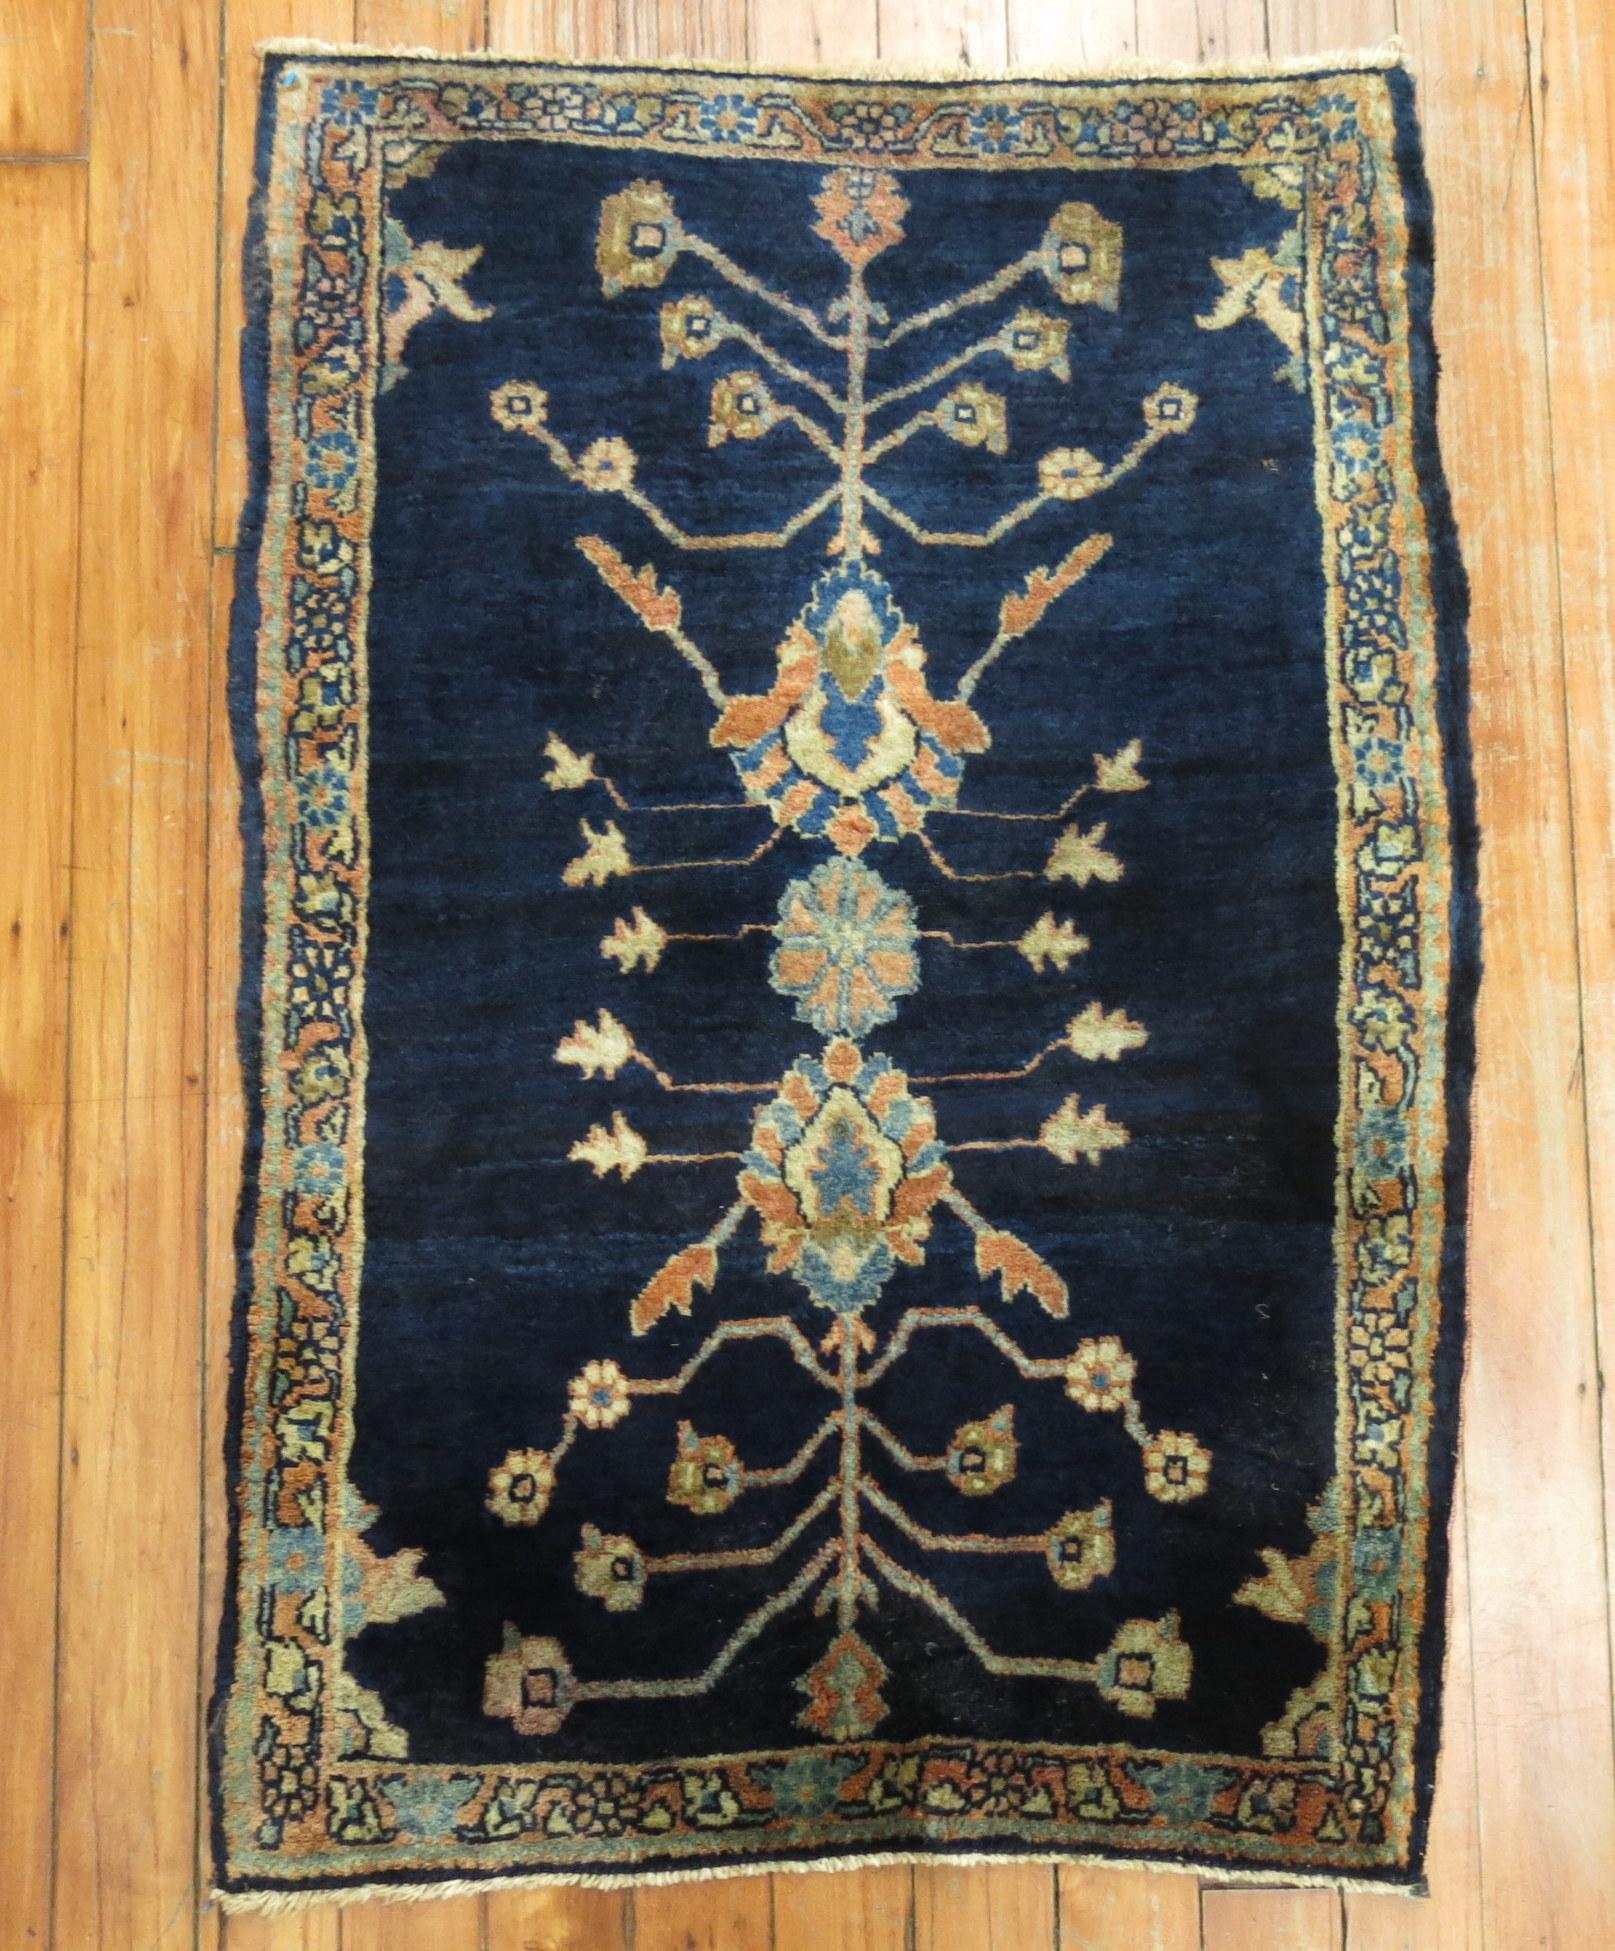 Stunning early 20th century Persian Sarouk Mohajeran rug mat.

Before the 1920s the Sarouk design was the most popular of Persian rugs worldwide. Most of them consist of deep red fields with navy borders. Rarely are they found in inverse colors